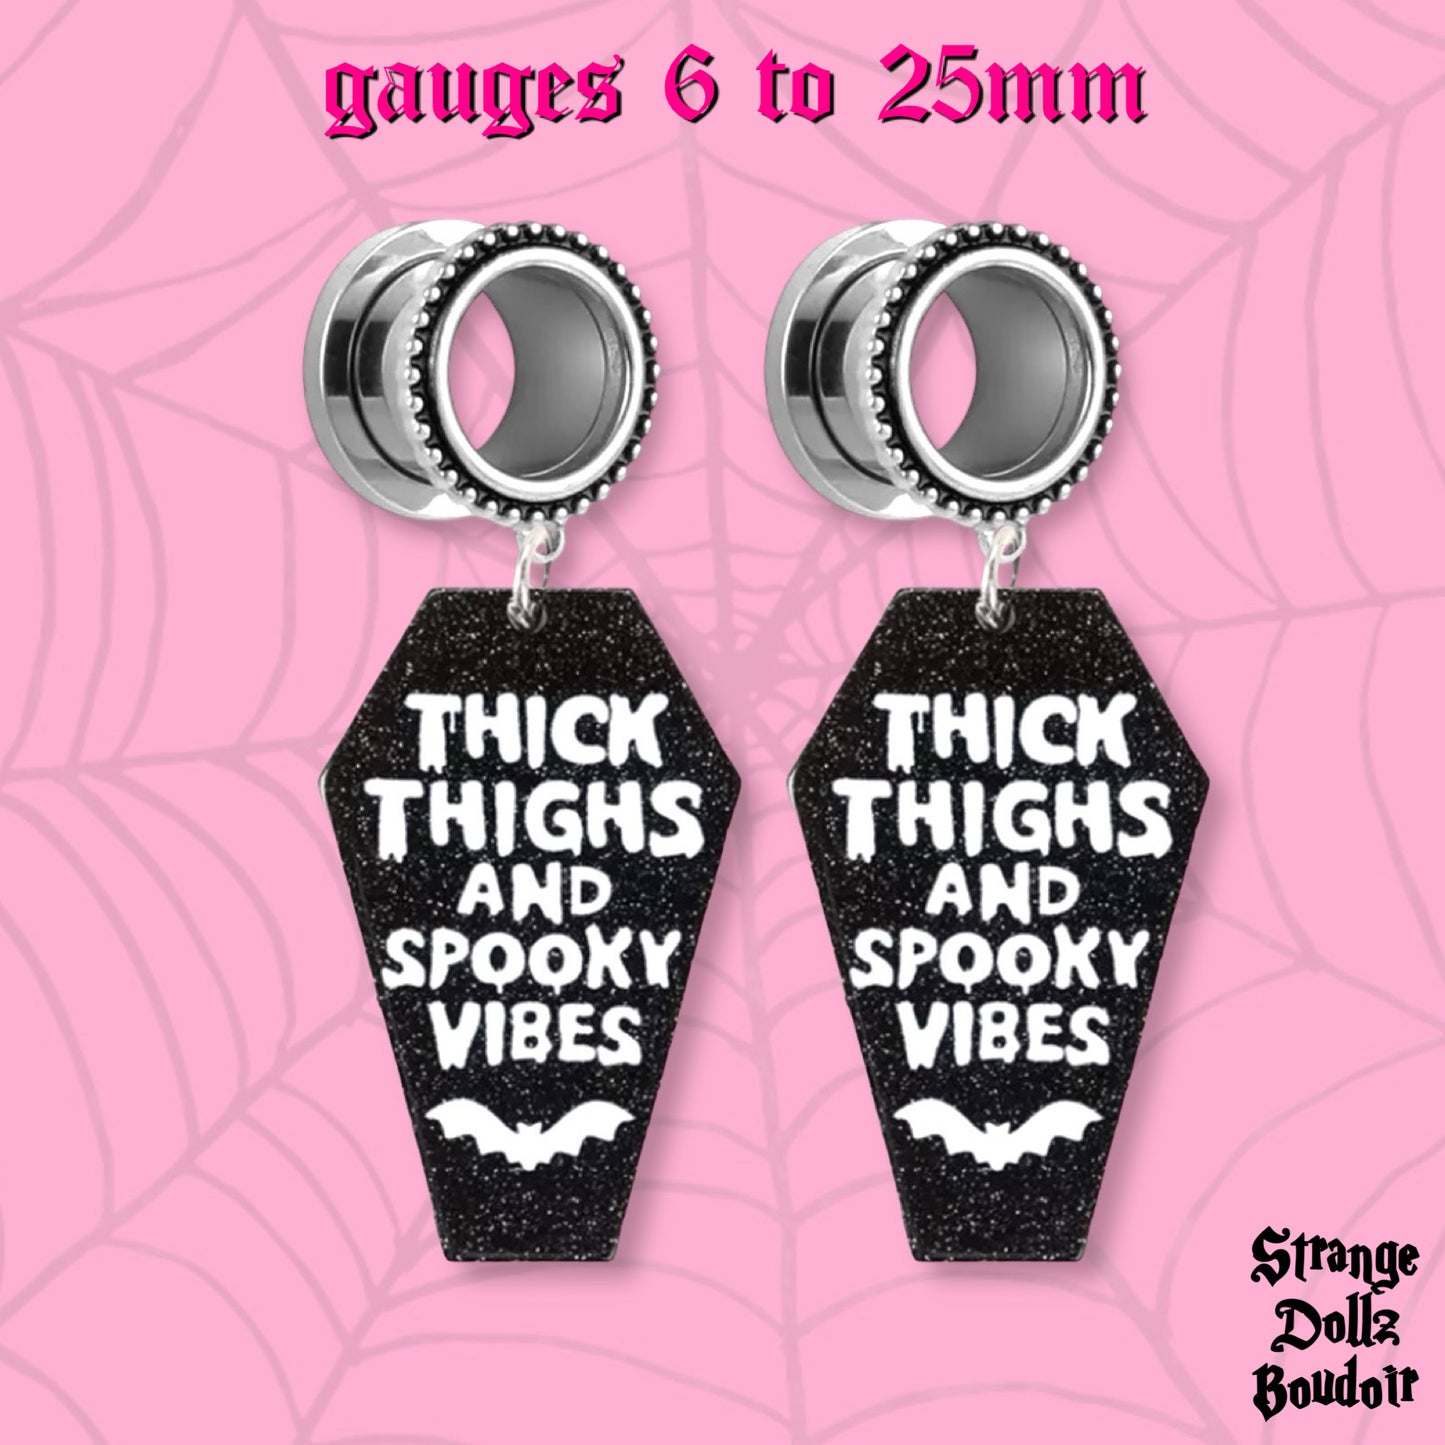 Thick thighs and spooky vibes Earrings, stretched ears, Strange Dollz Boudoir